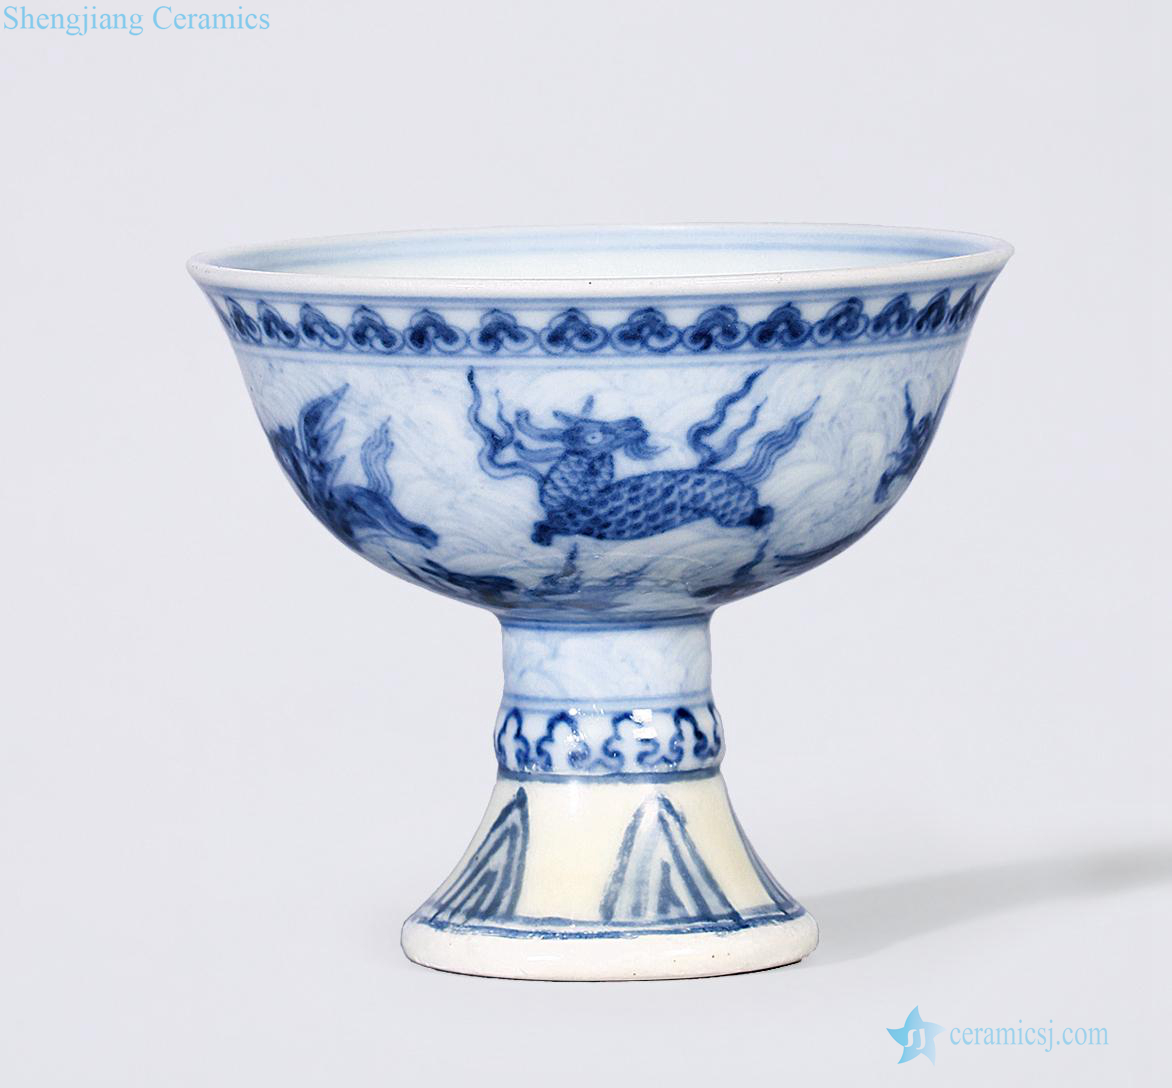 The qing emperor kangxi Blue and white hippocampus Sanskrit footed cup